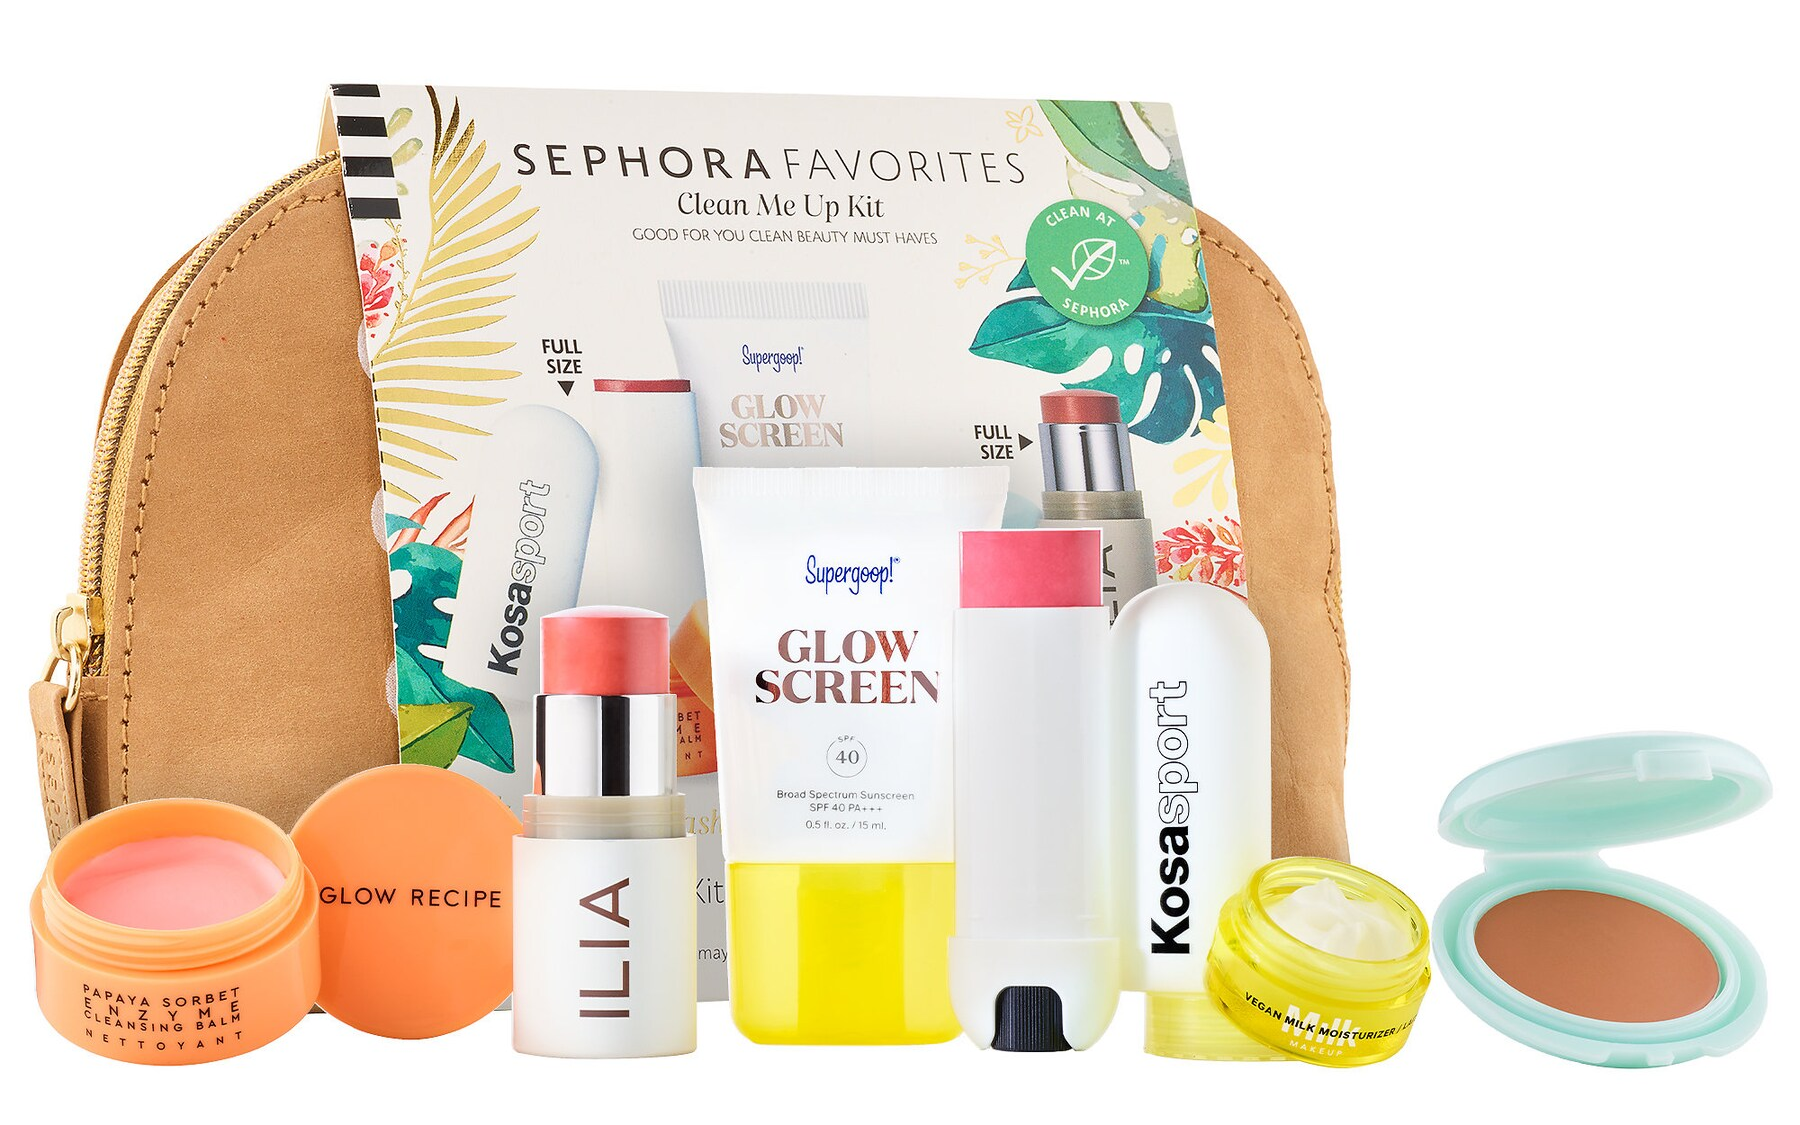 Sephora Favorites Reviews Get All The Details At Hello Subscription!